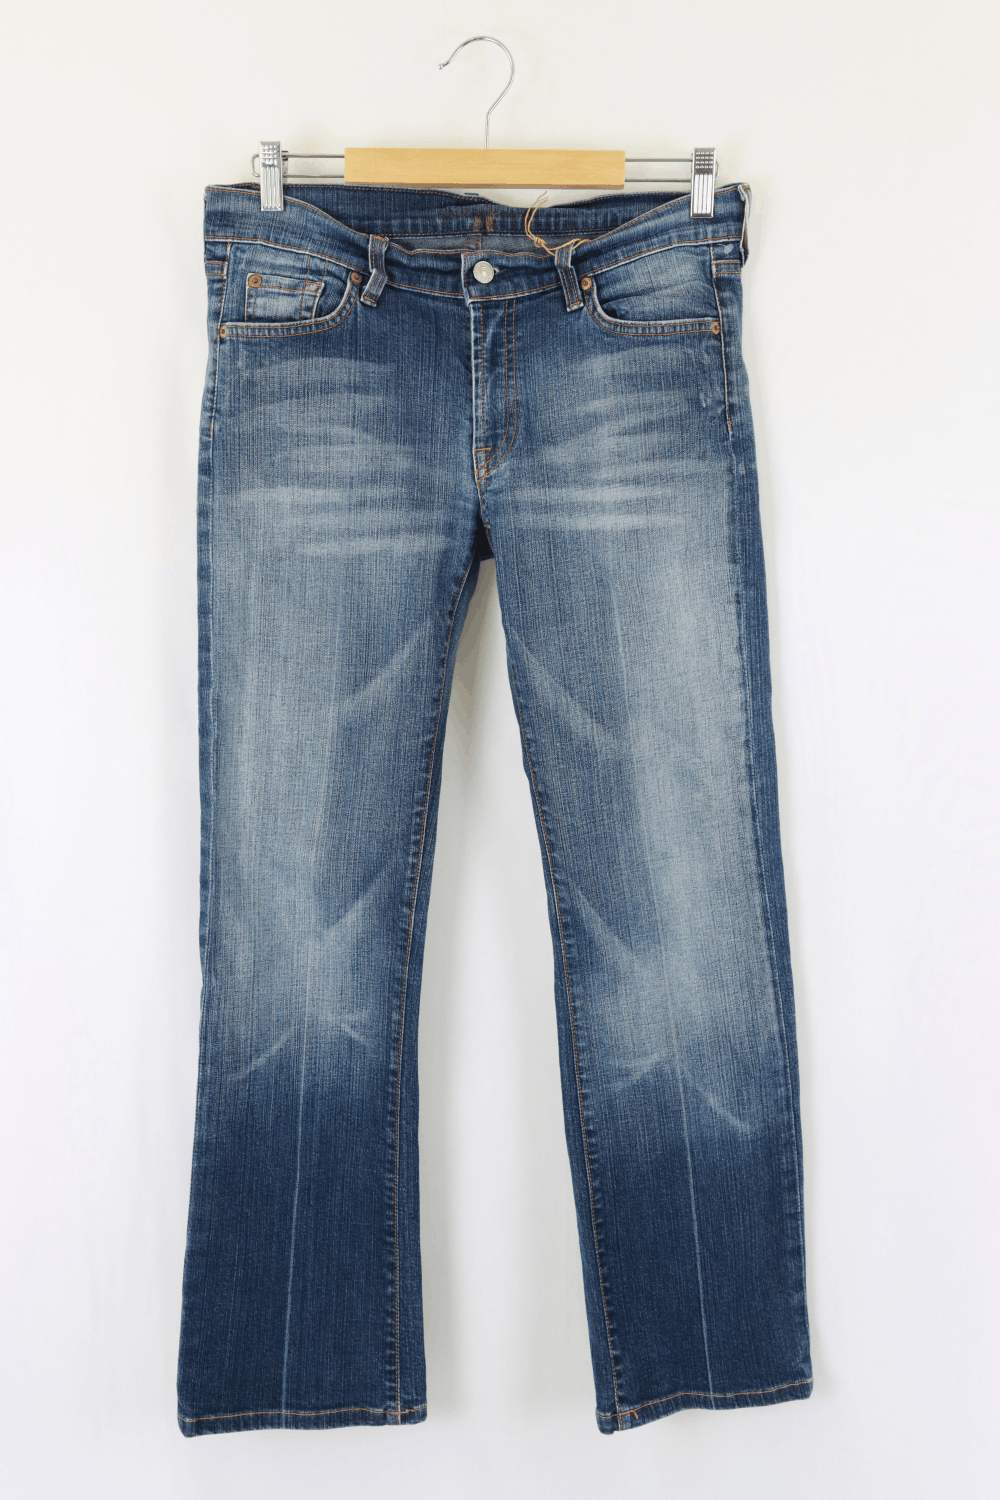 7 For All Mankind Blue Jeans 14